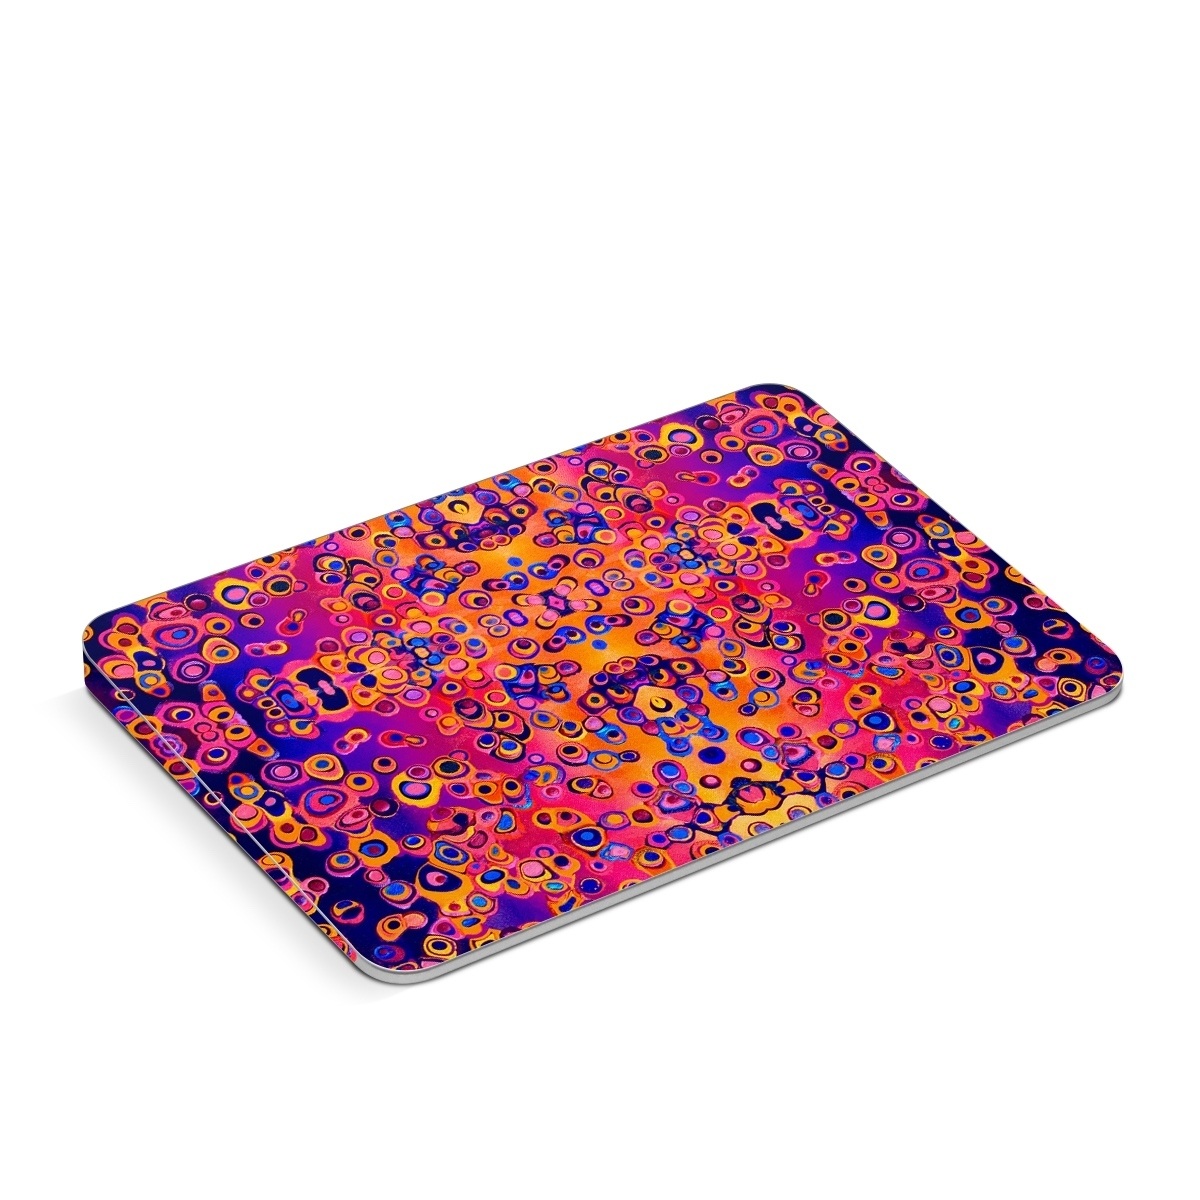 Apple Magic Trackpad Skin design of Pattern, Psychedelic art, Symmetry, with orange, purple, blue, pink colors